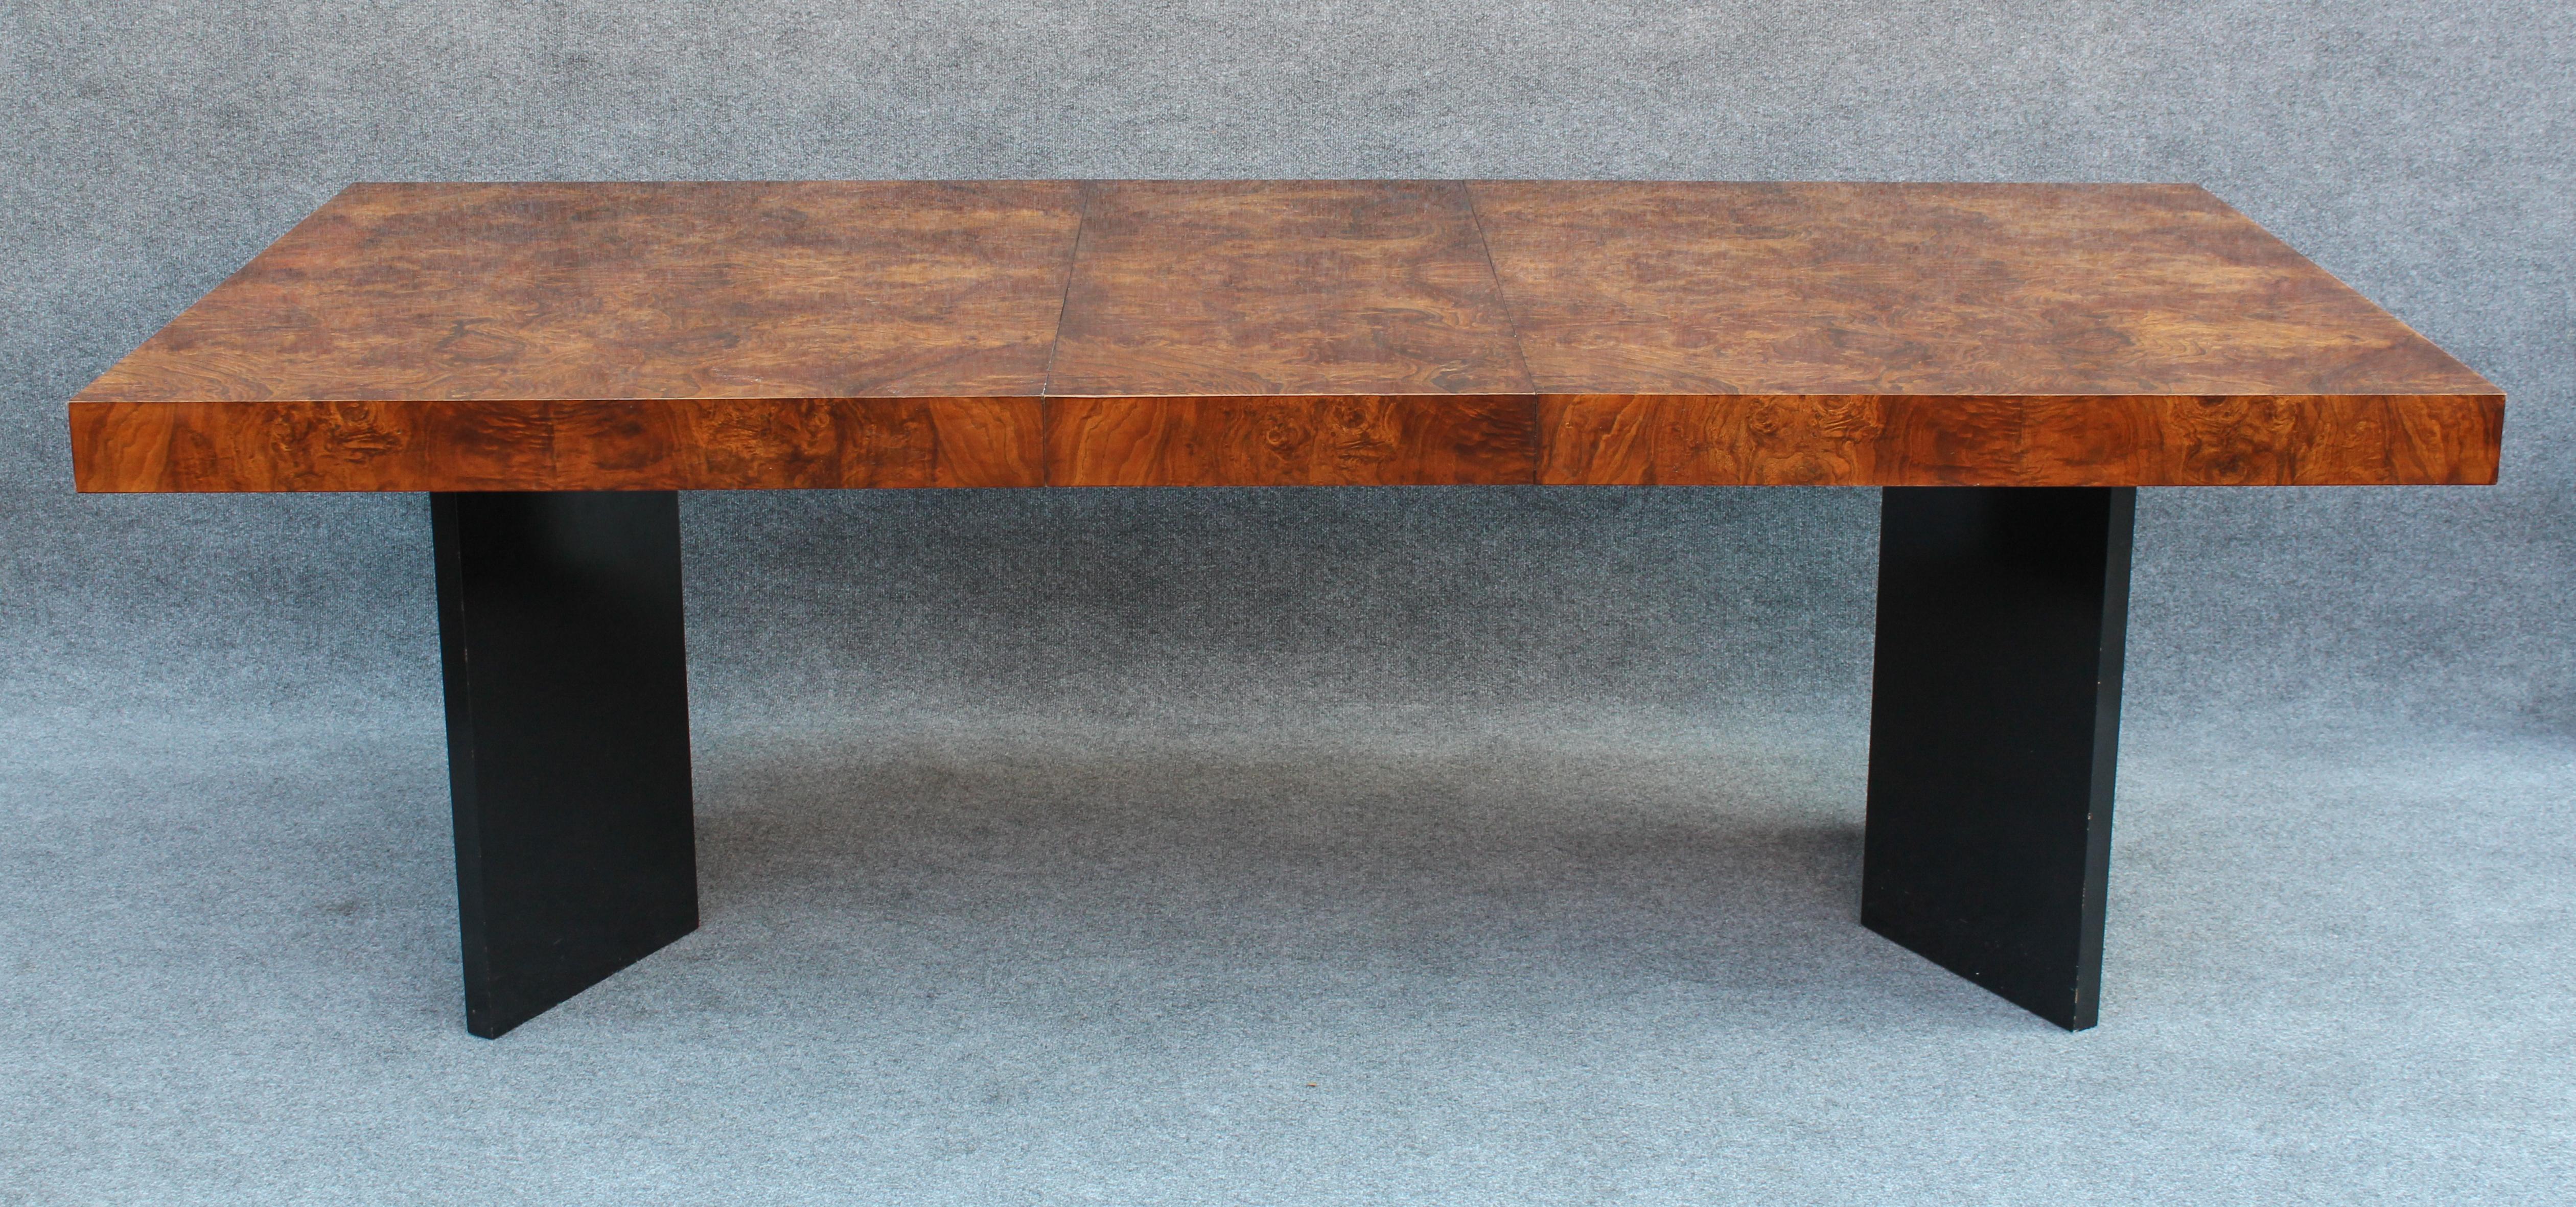 Late 20th Century Milo Baughman Attr. Walnut Burl Large Dining Table with Extension Leaf For Sale